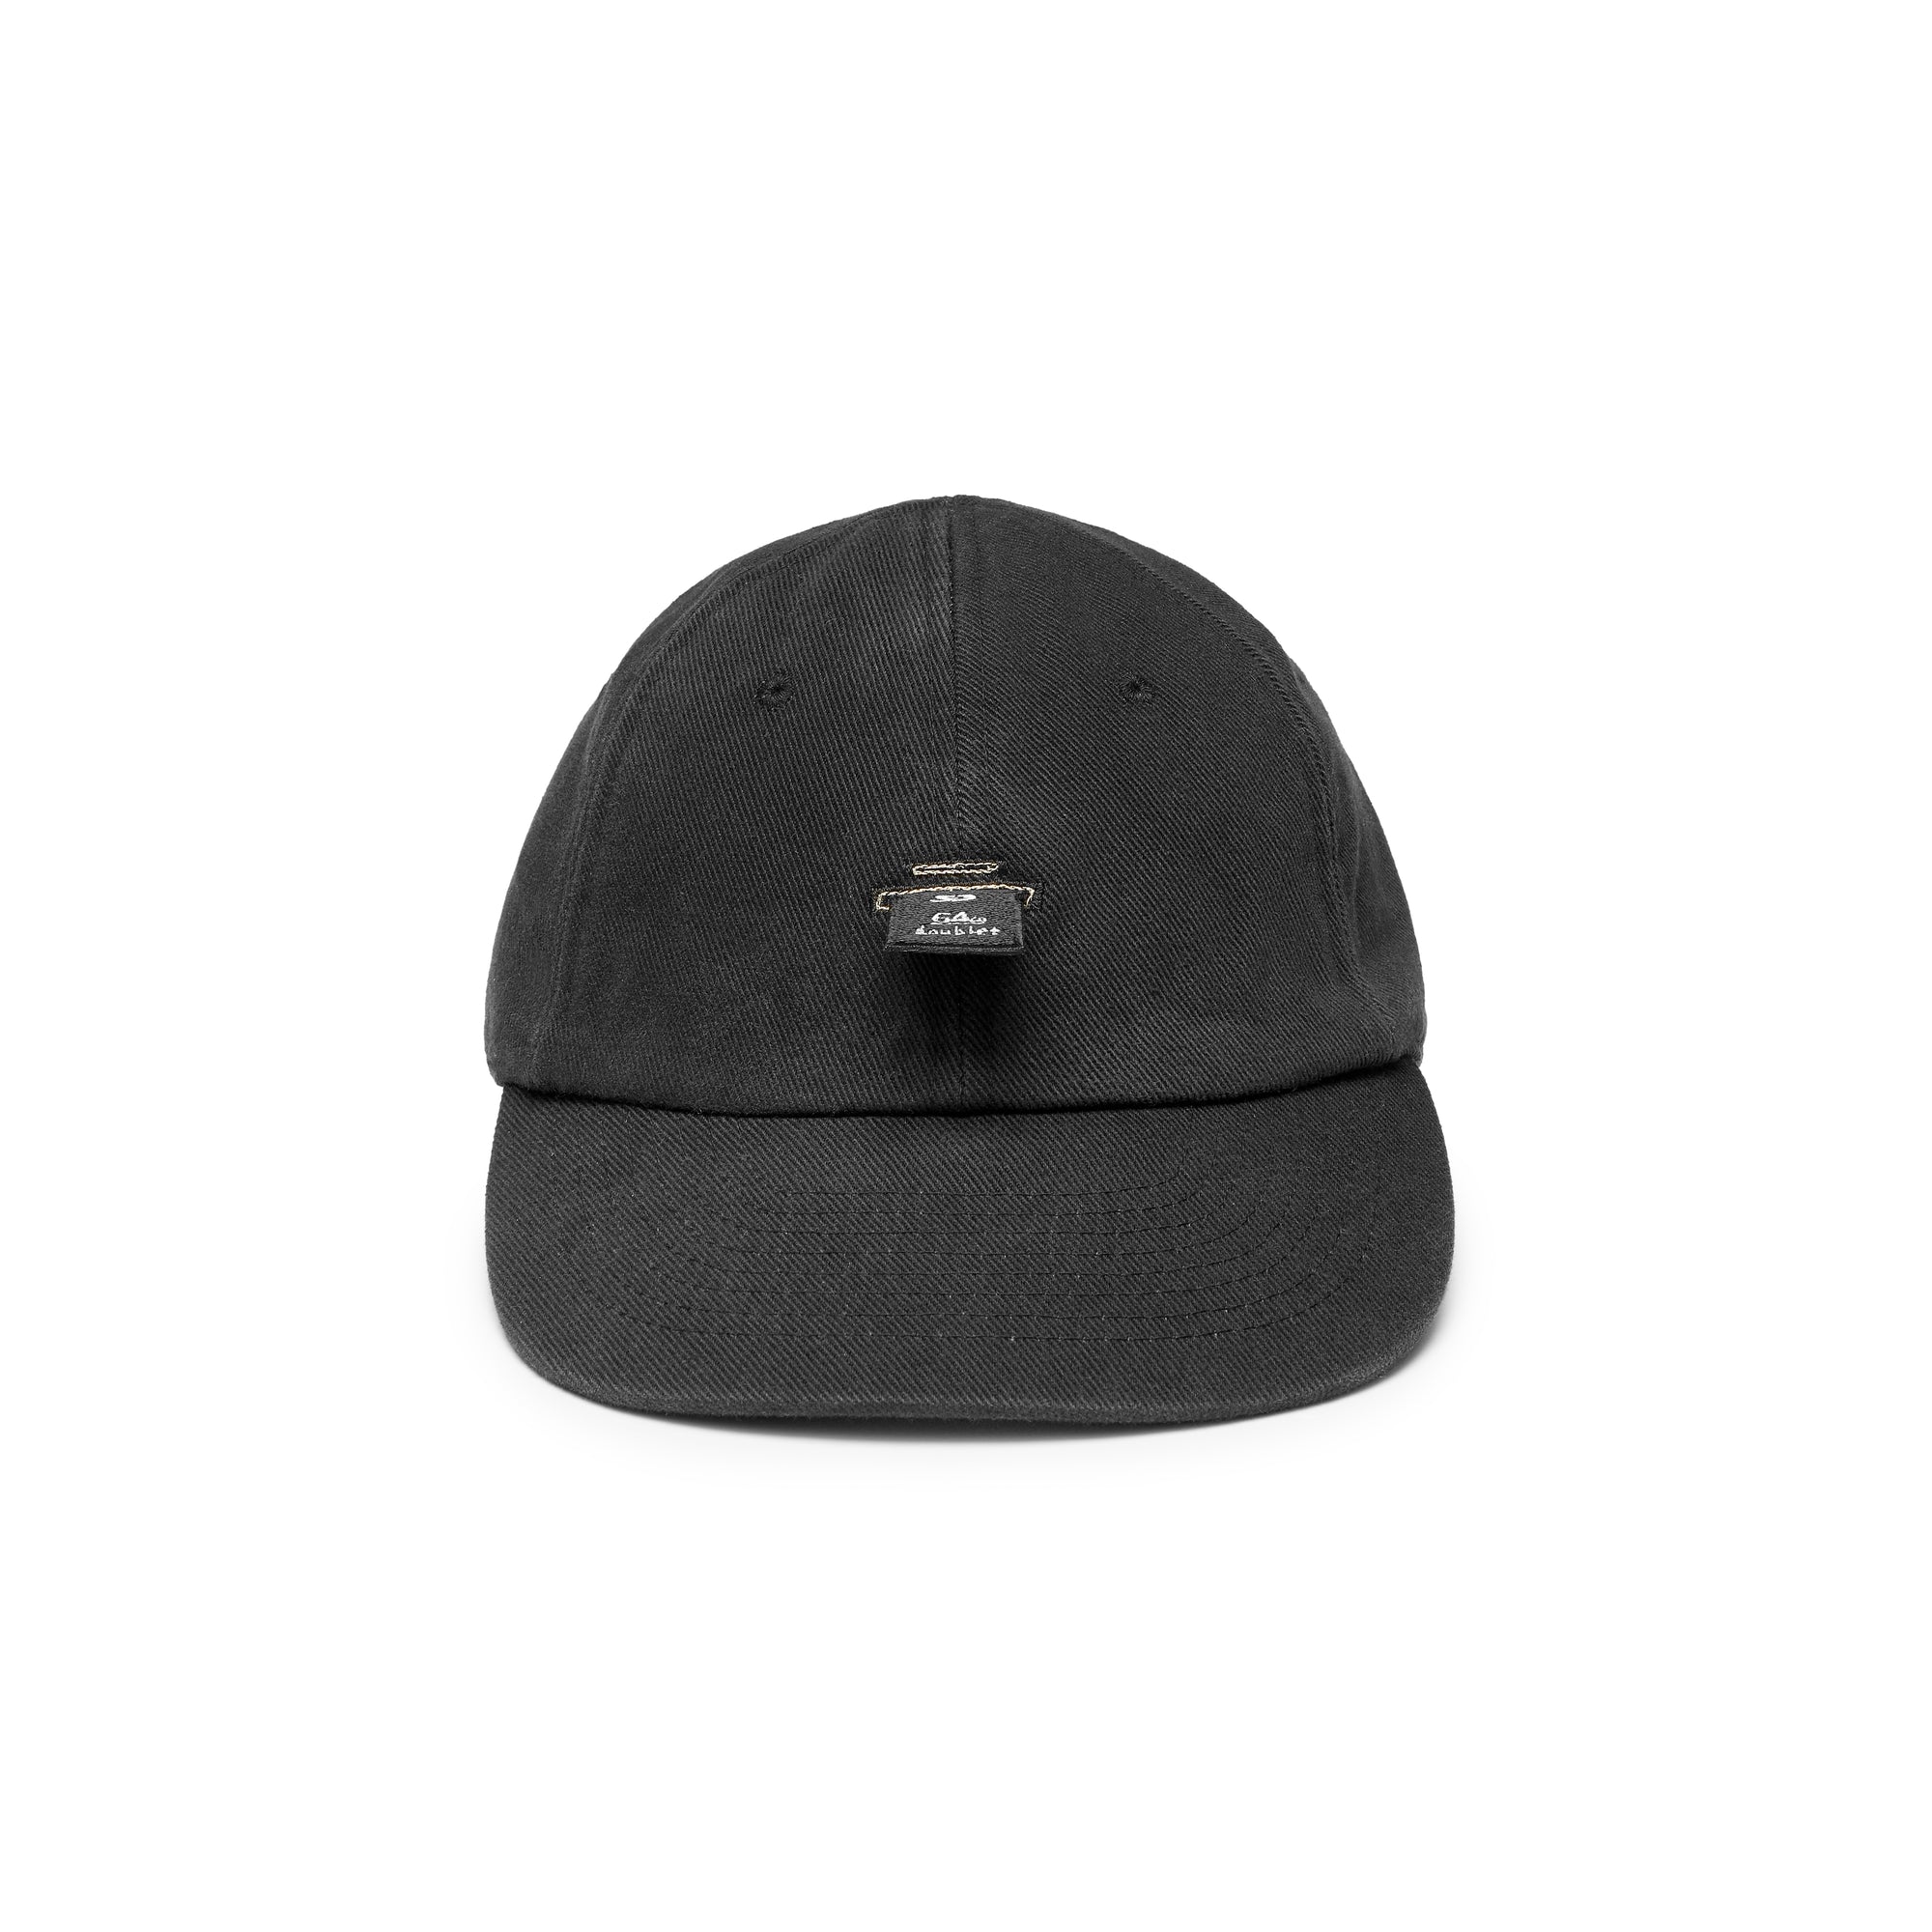 Doublet - Men's SD Card Embroidery Cap - (Black) view 1